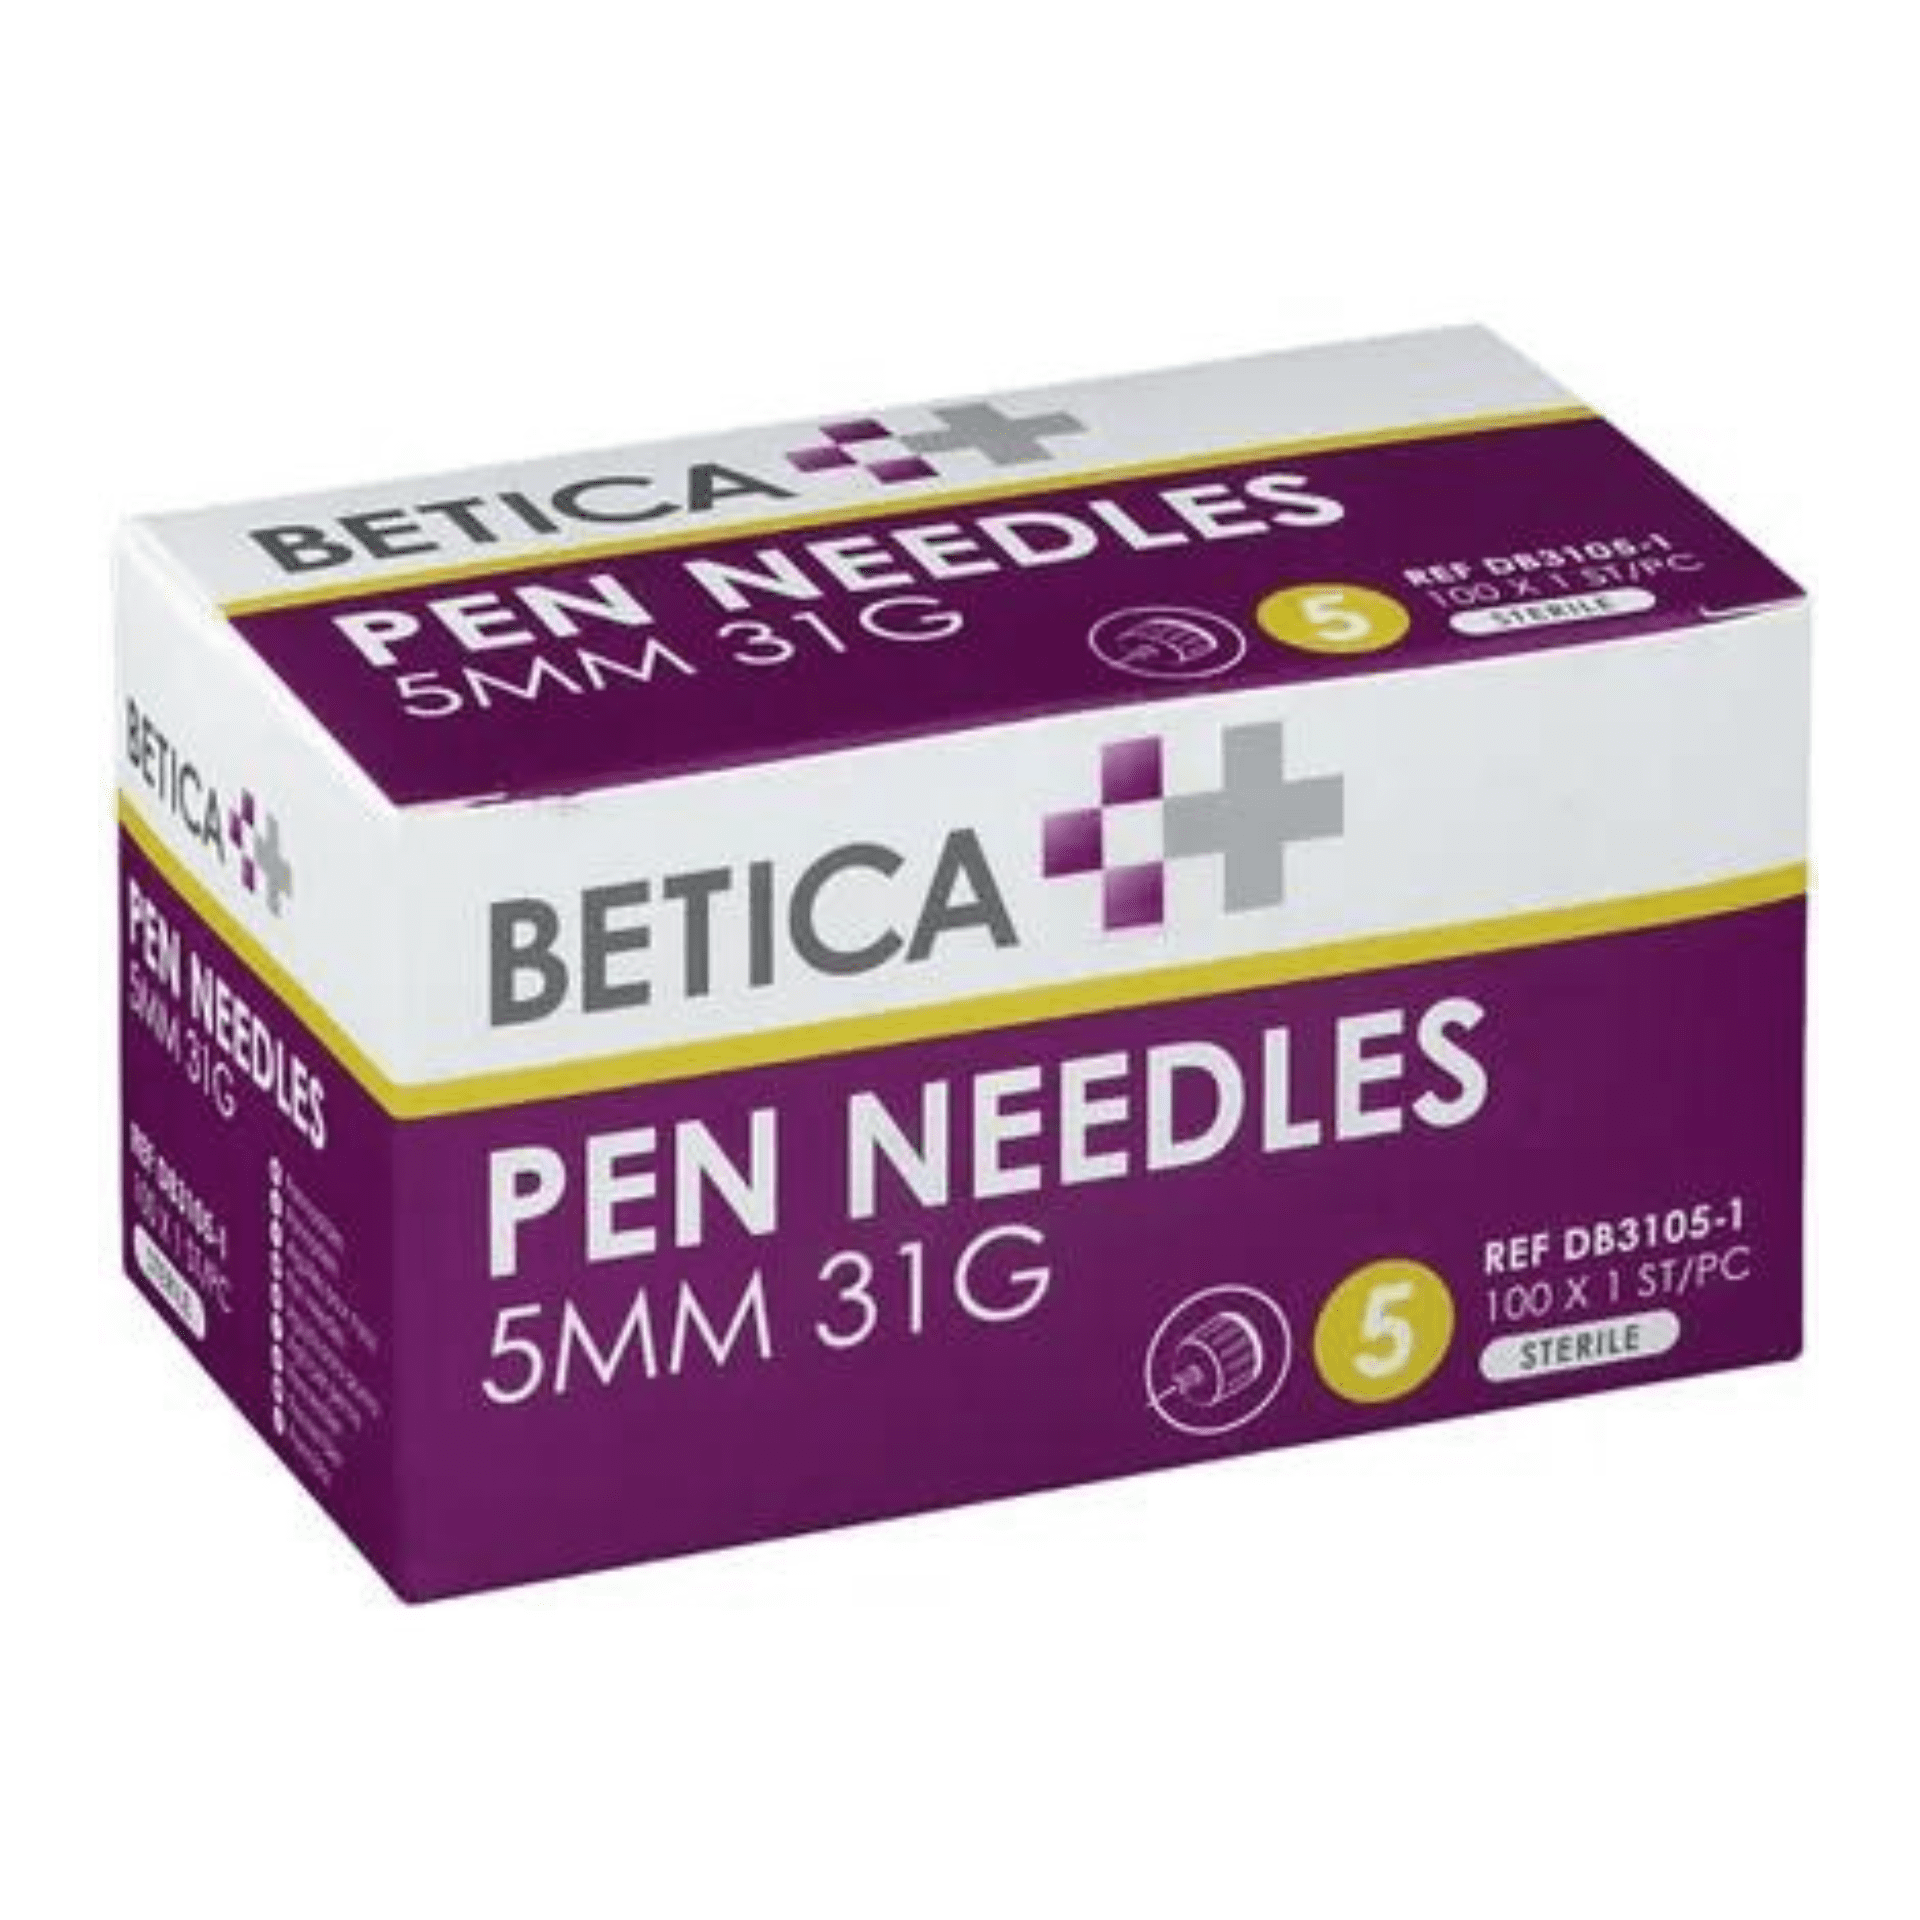 Betica Dual Safety Pen Needles 5 mm 31 g 